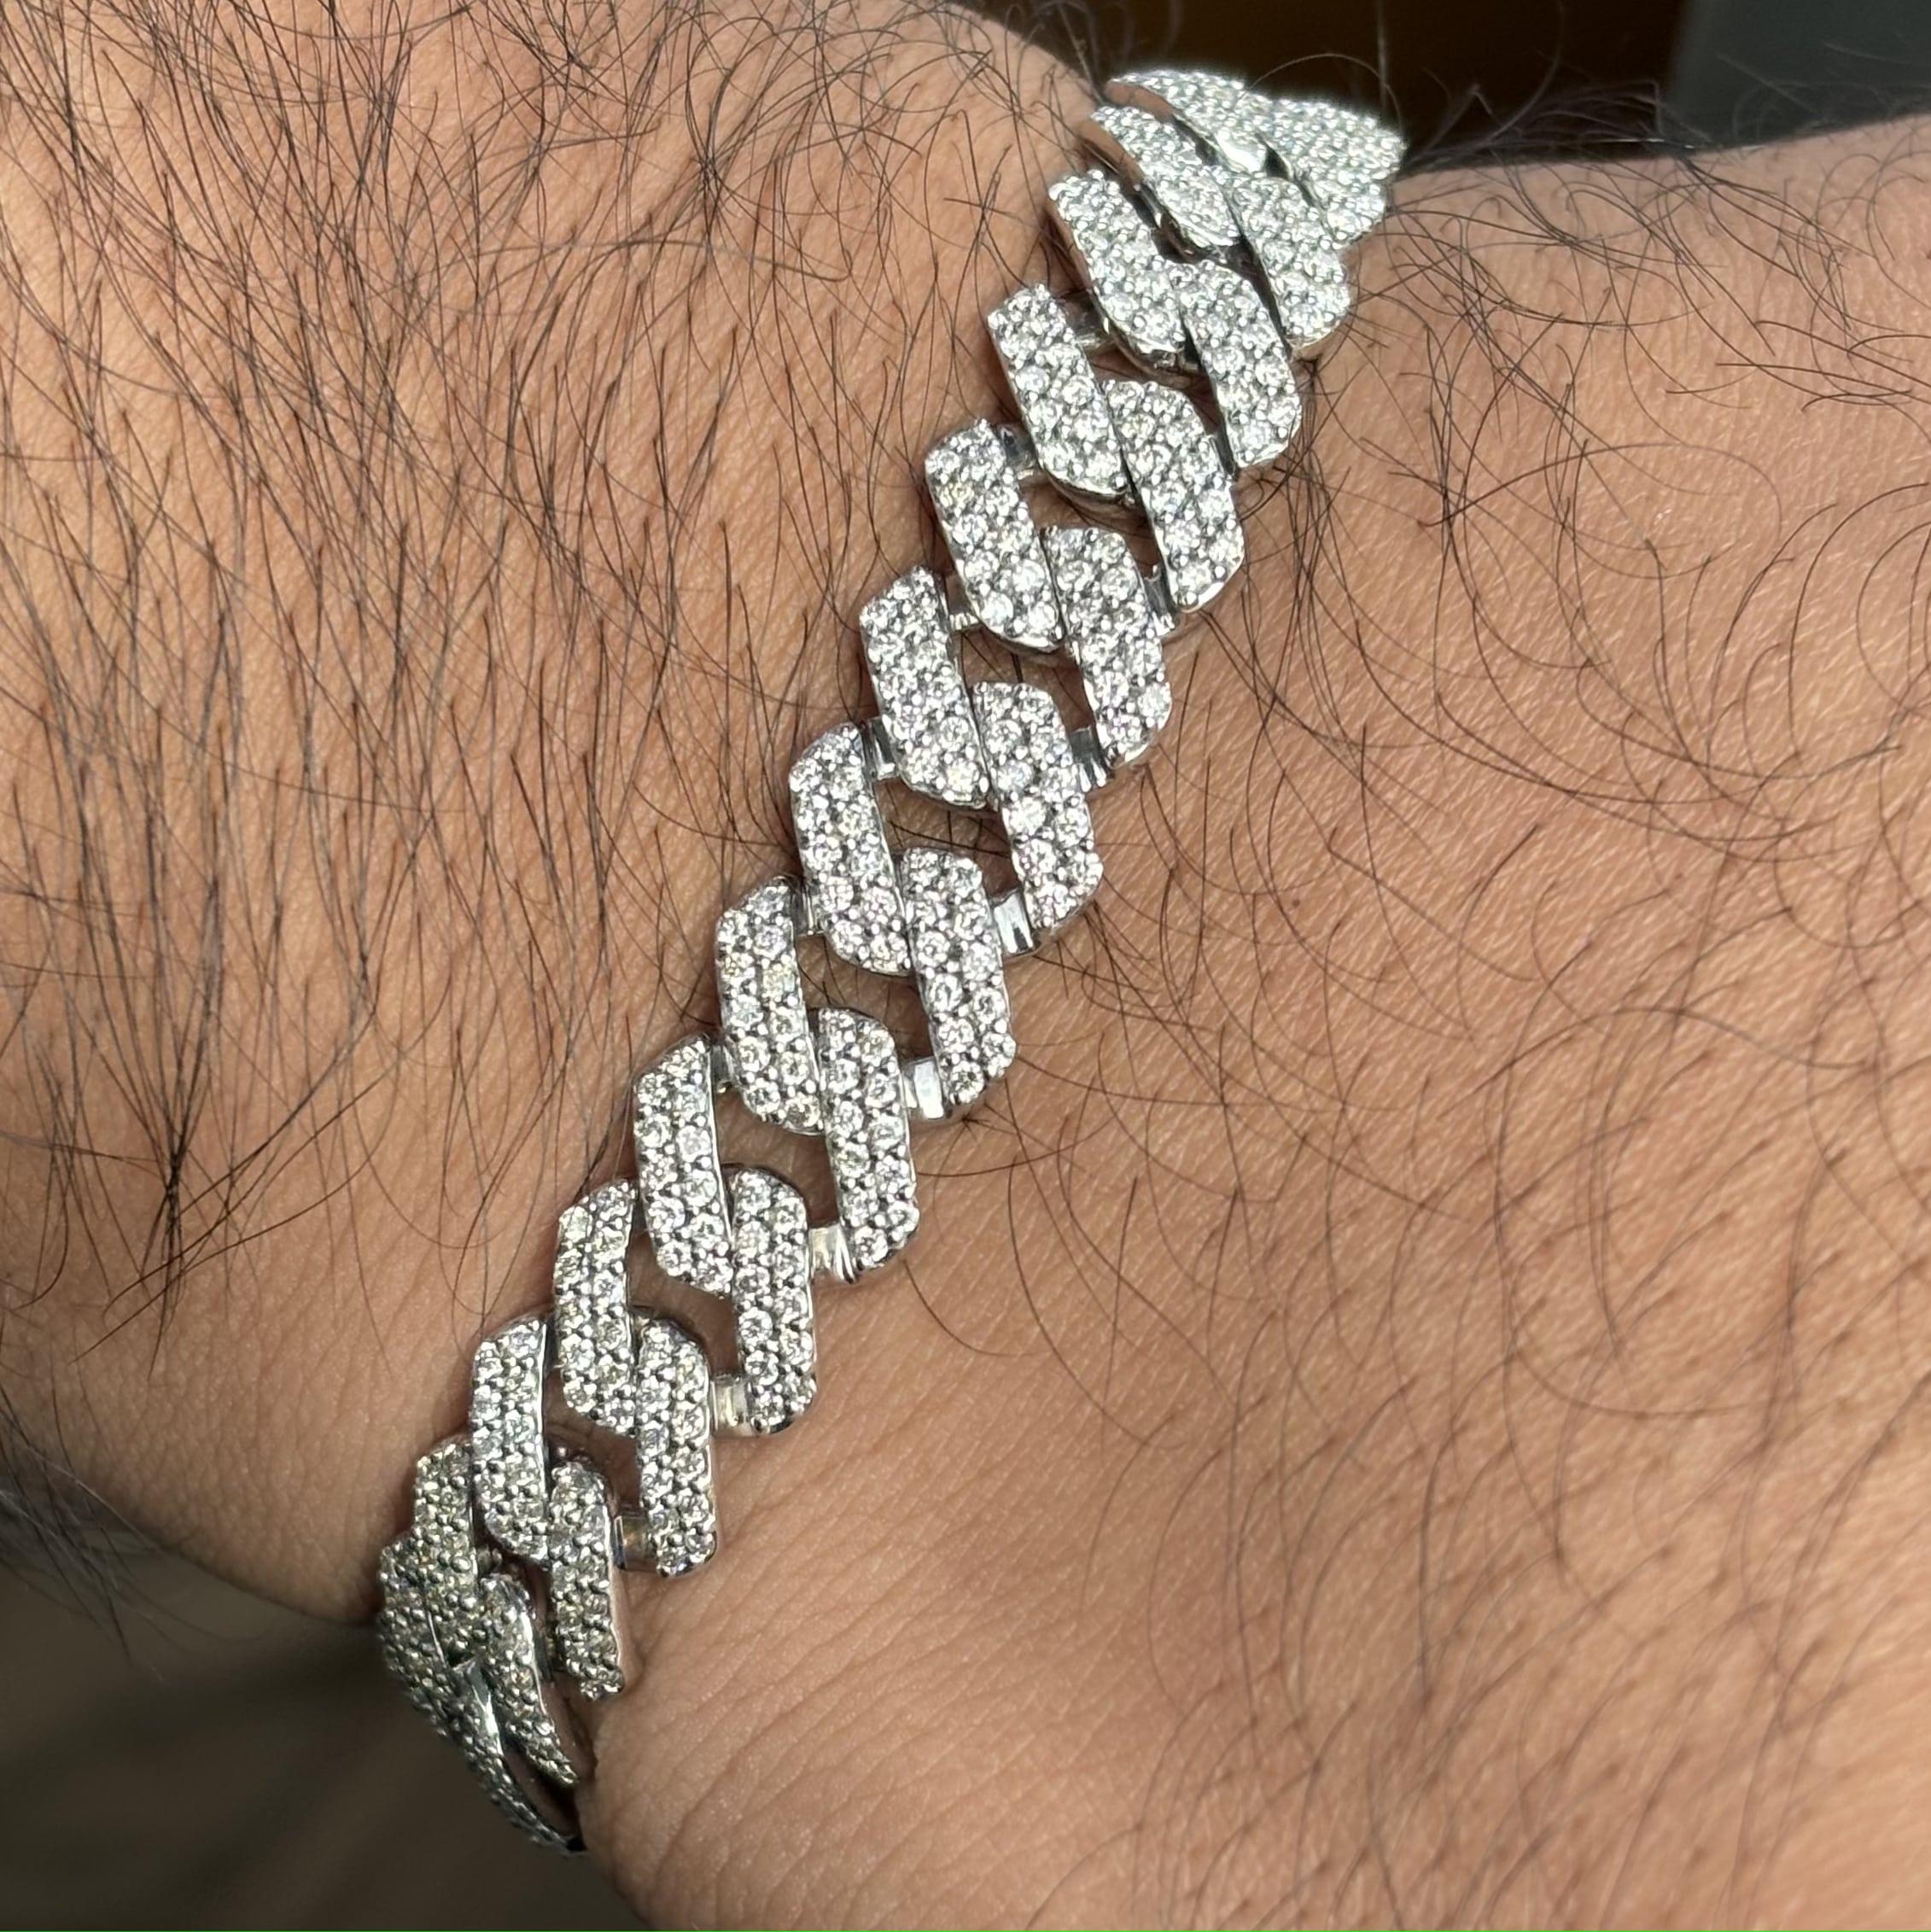 Introducing this classic cuban link bracelet that is an essential addition to any gentleman's jewelry collection. Adorned with 5.23 Carat, G Color VS Clarity Natural Diamonds, this exquisite bracelet is crafted in 33.52 grams of 10K White